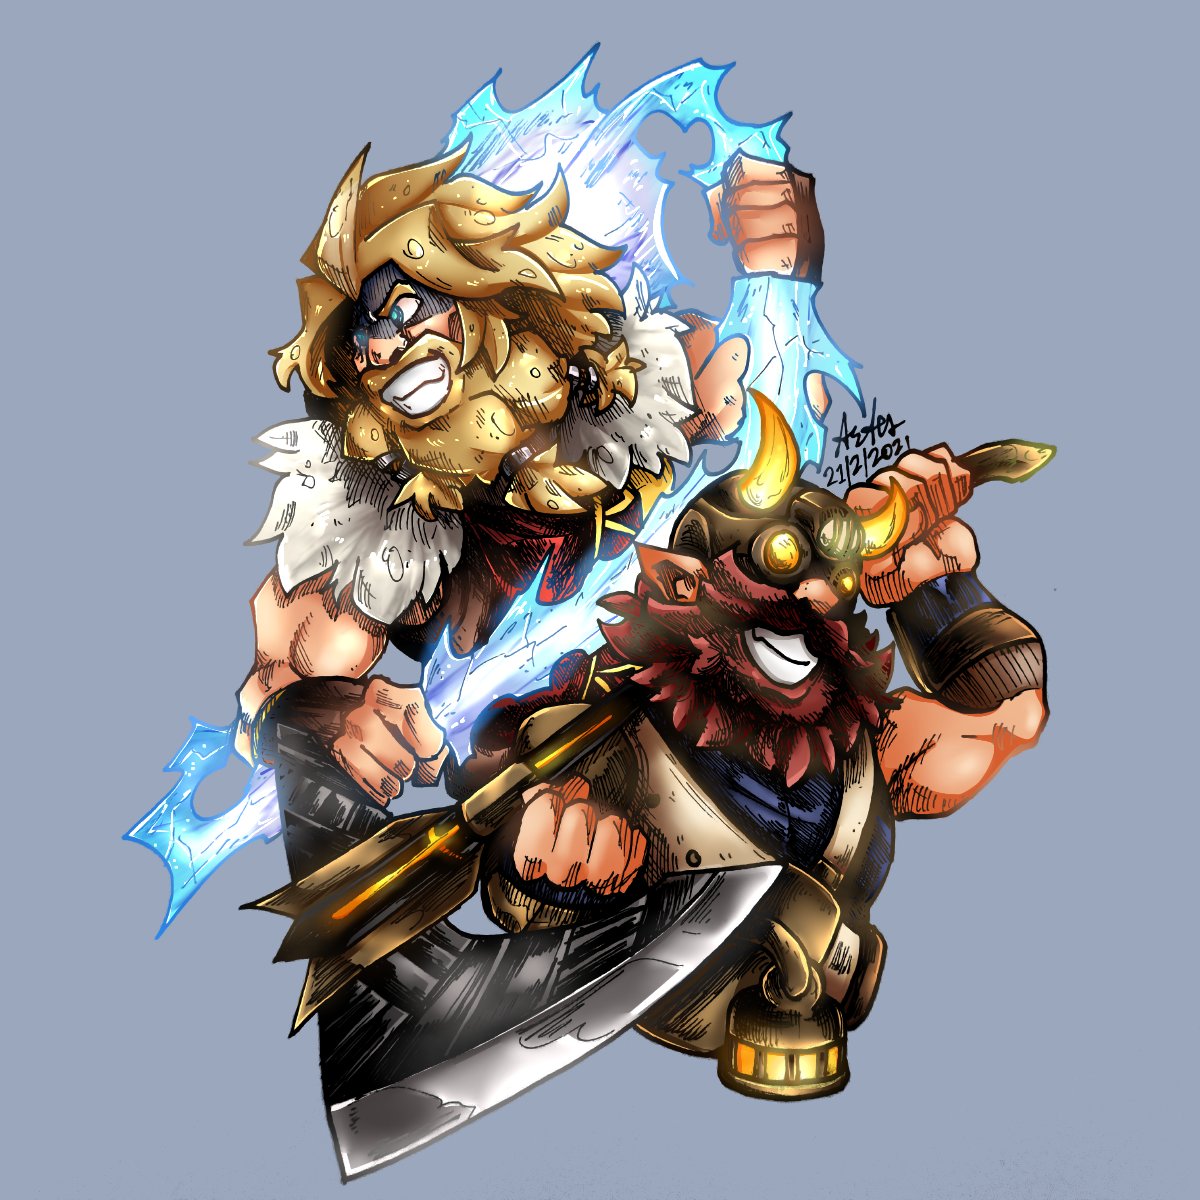 RT @AsterOortkuiper: #BrawlhallaArt I colored Thor and Ulgrim https://t.co/rpwwCnr4UU